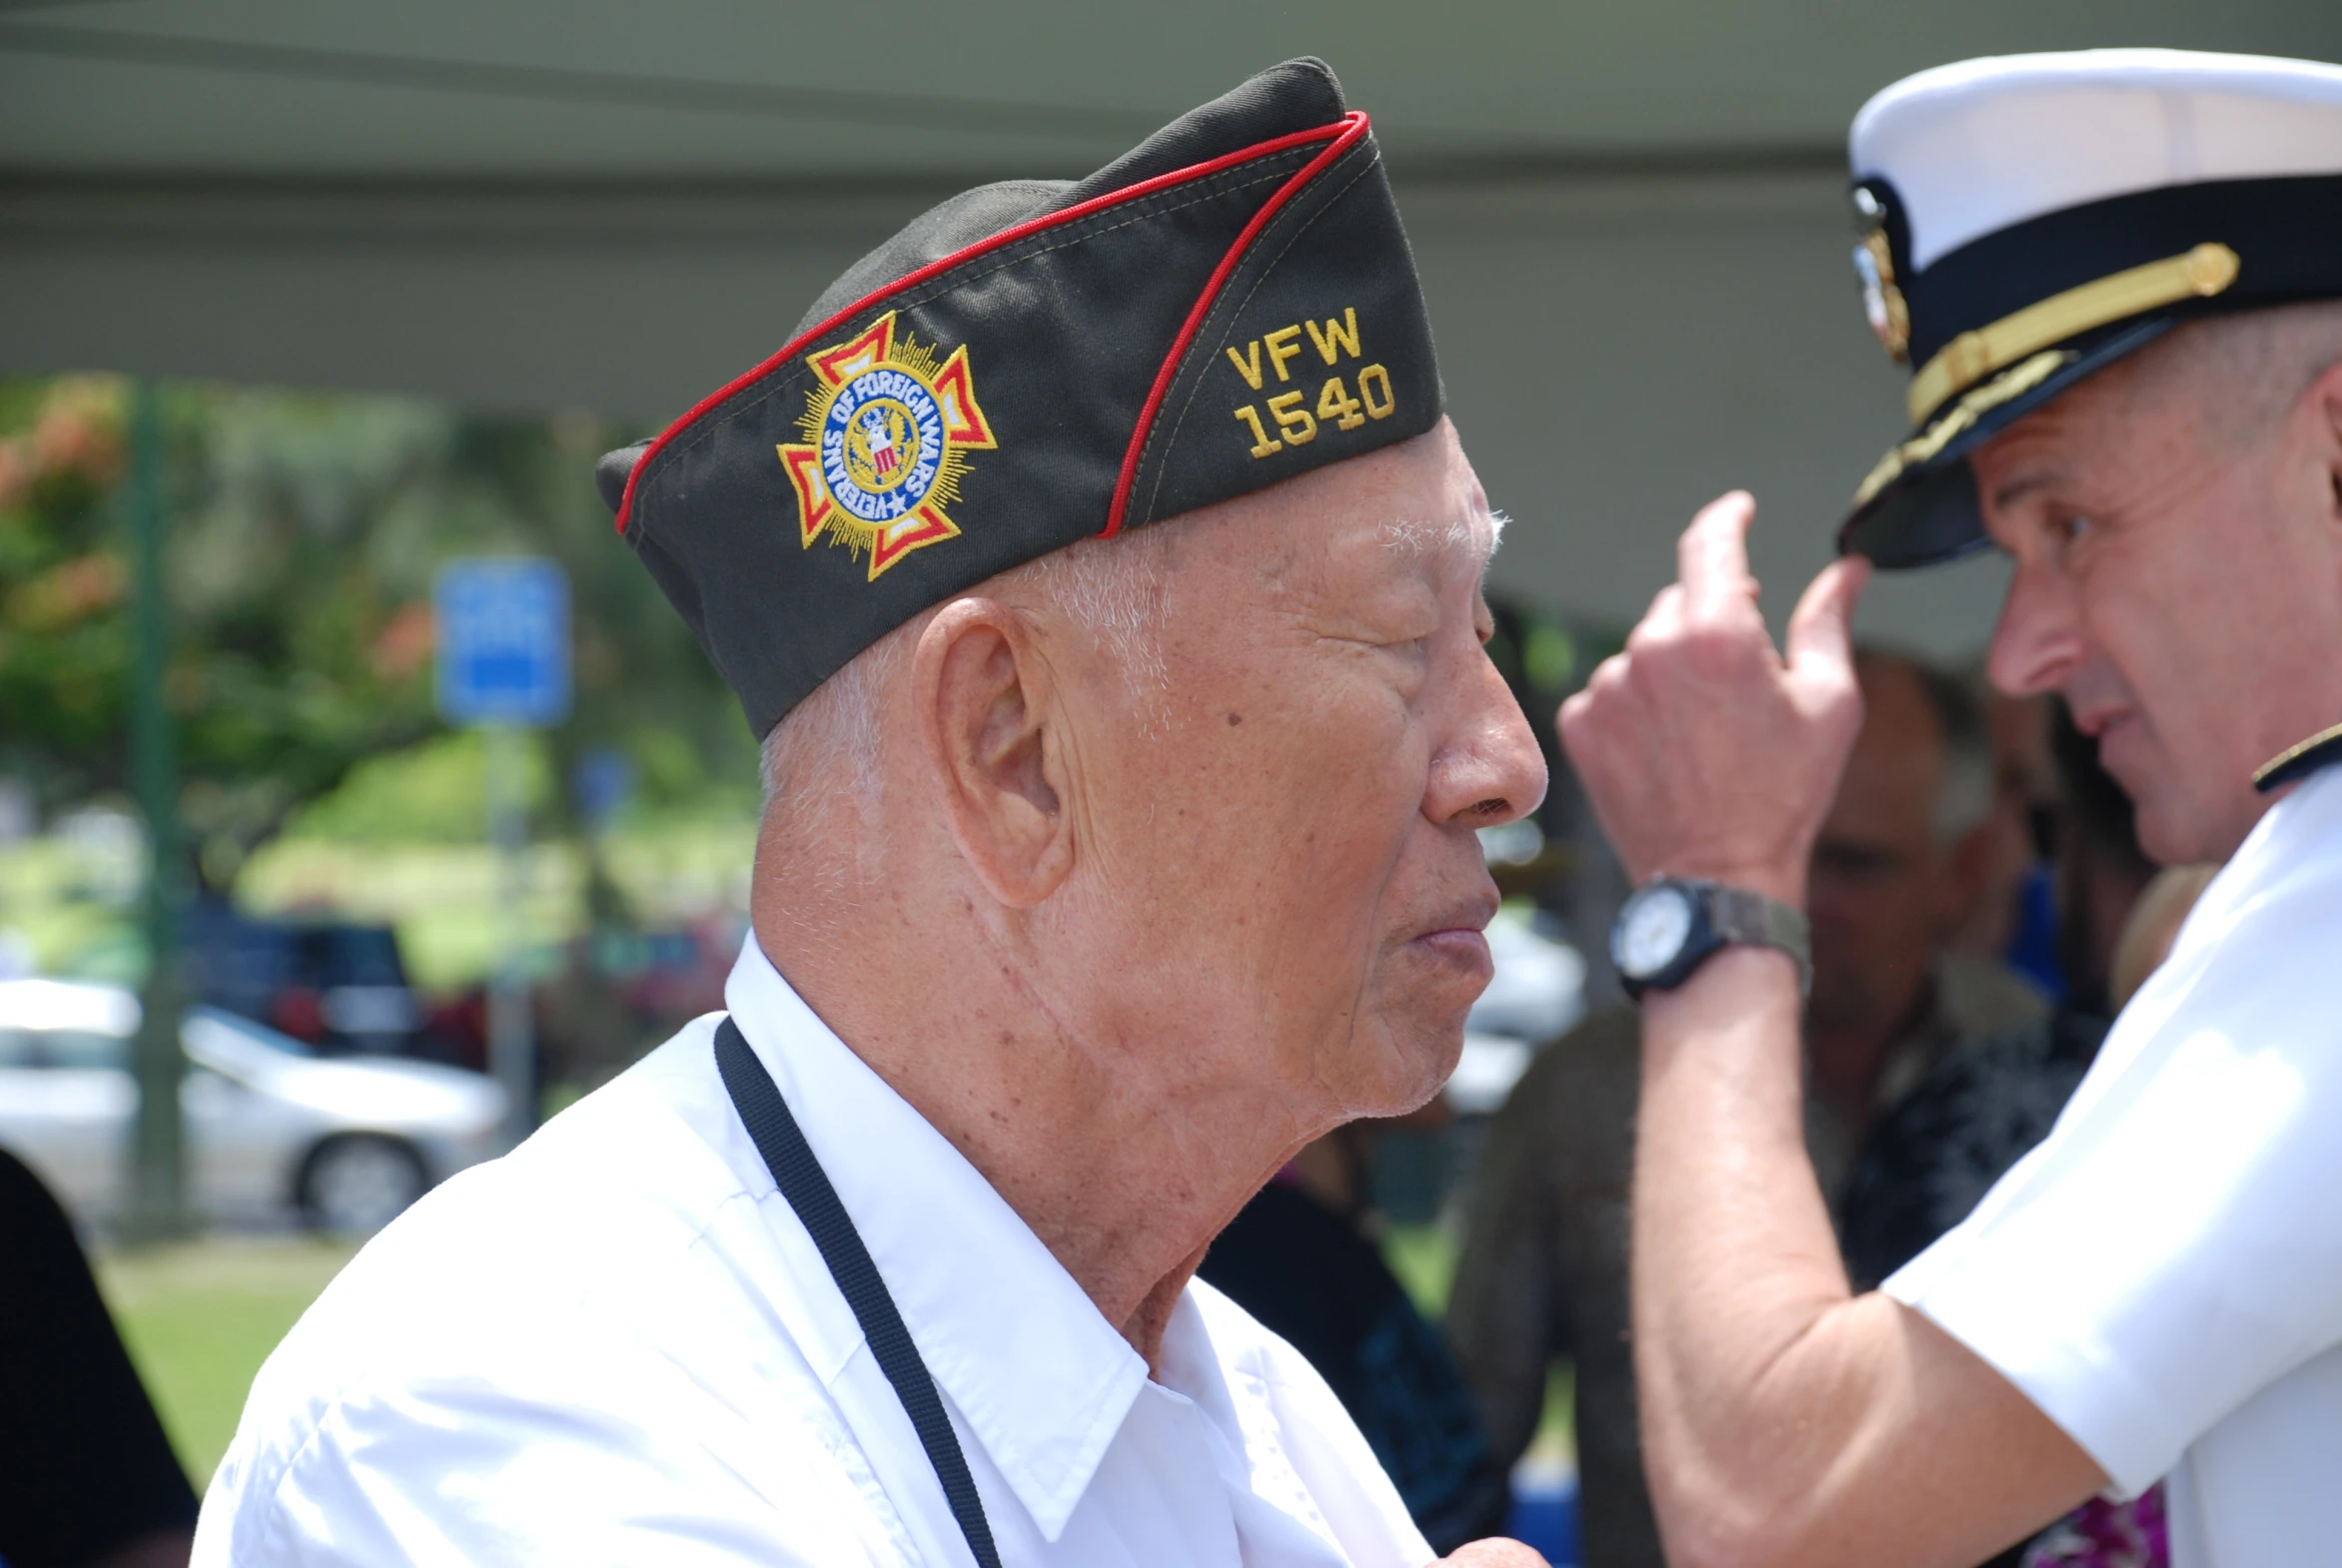 an older man saluting the colors of his hat